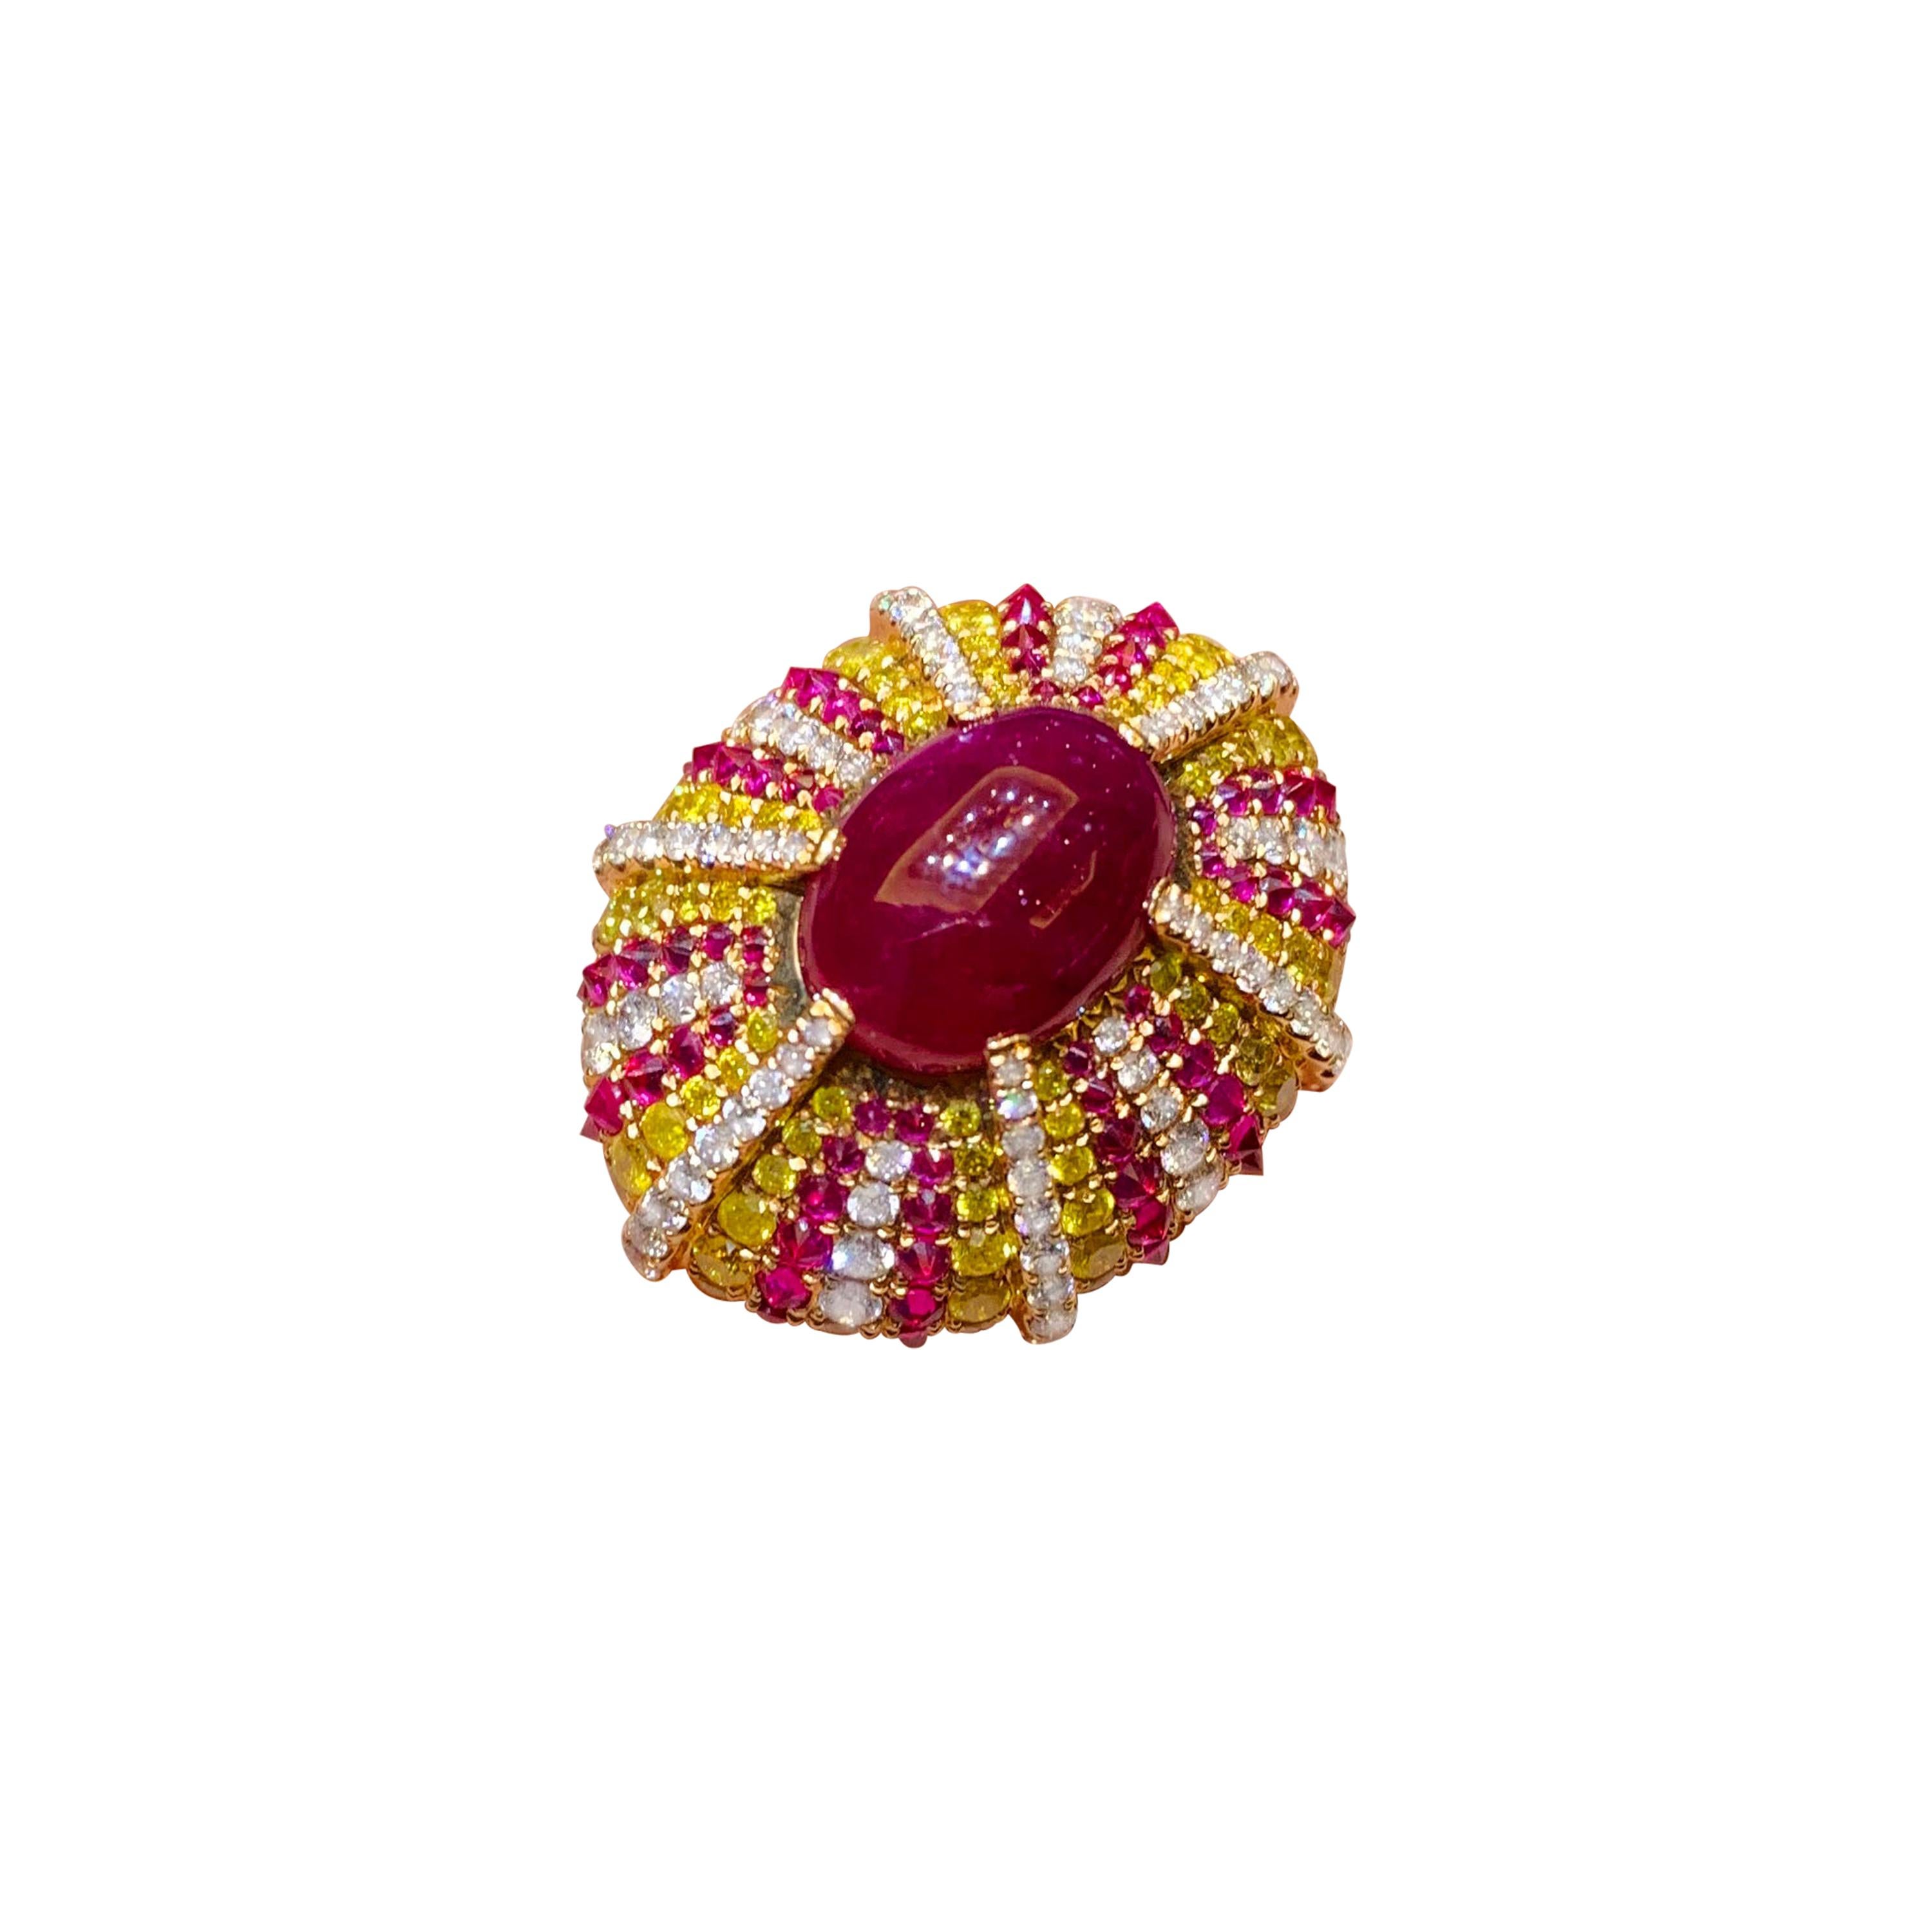 5.32 Carat Ruby with Fancy Vivid Yellow Diamond Ring For Sale